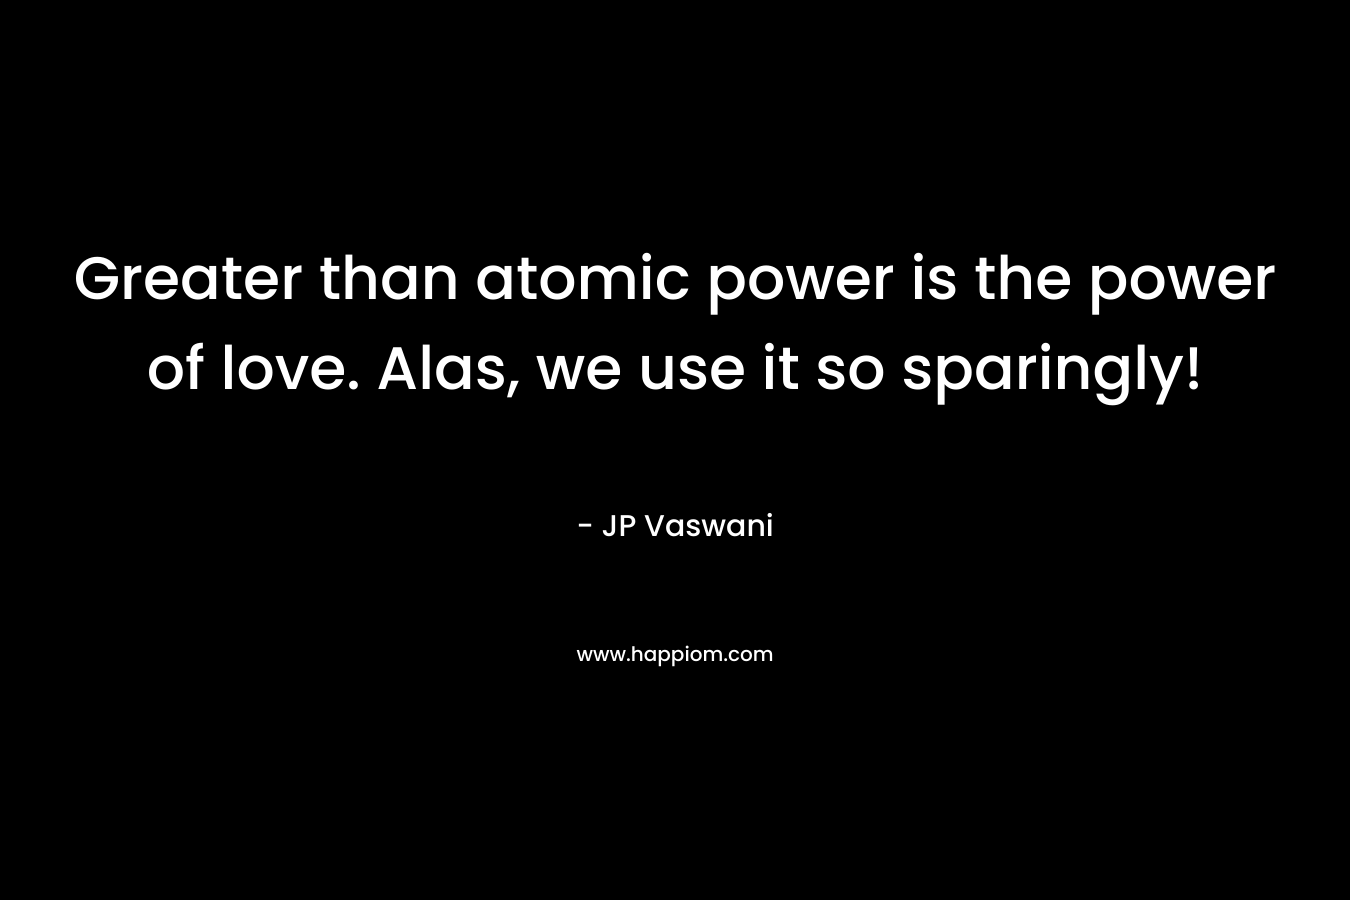 Greater than atomic power is the power of love. Alas, we use it so sparingly! – JP Vaswani